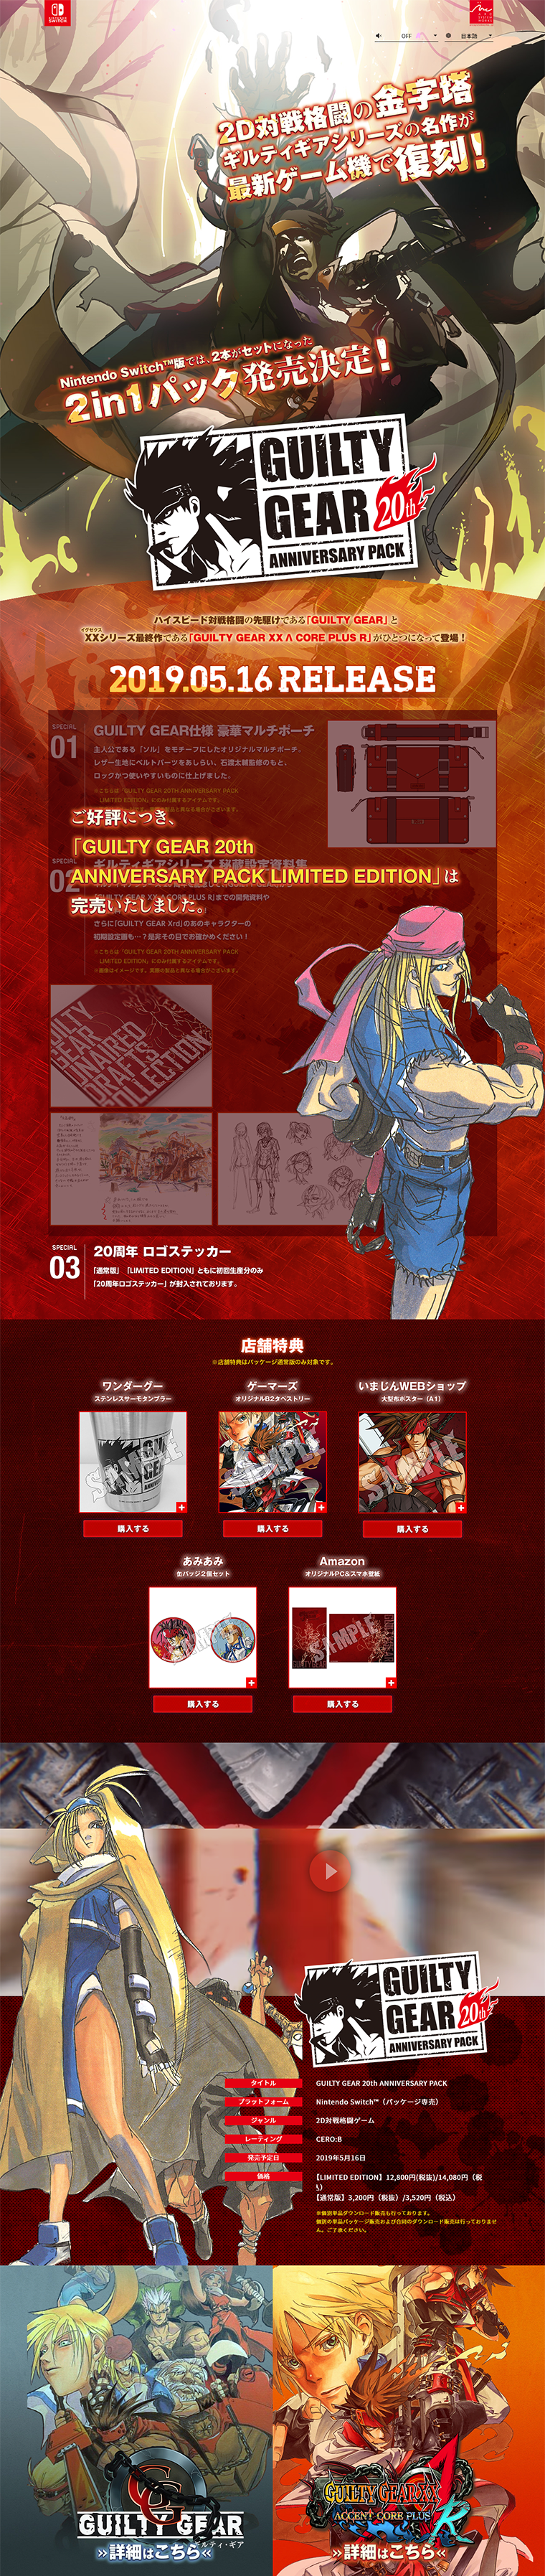 GUILTY GEAR 20th ANNIVERSARY PACK_pc_1